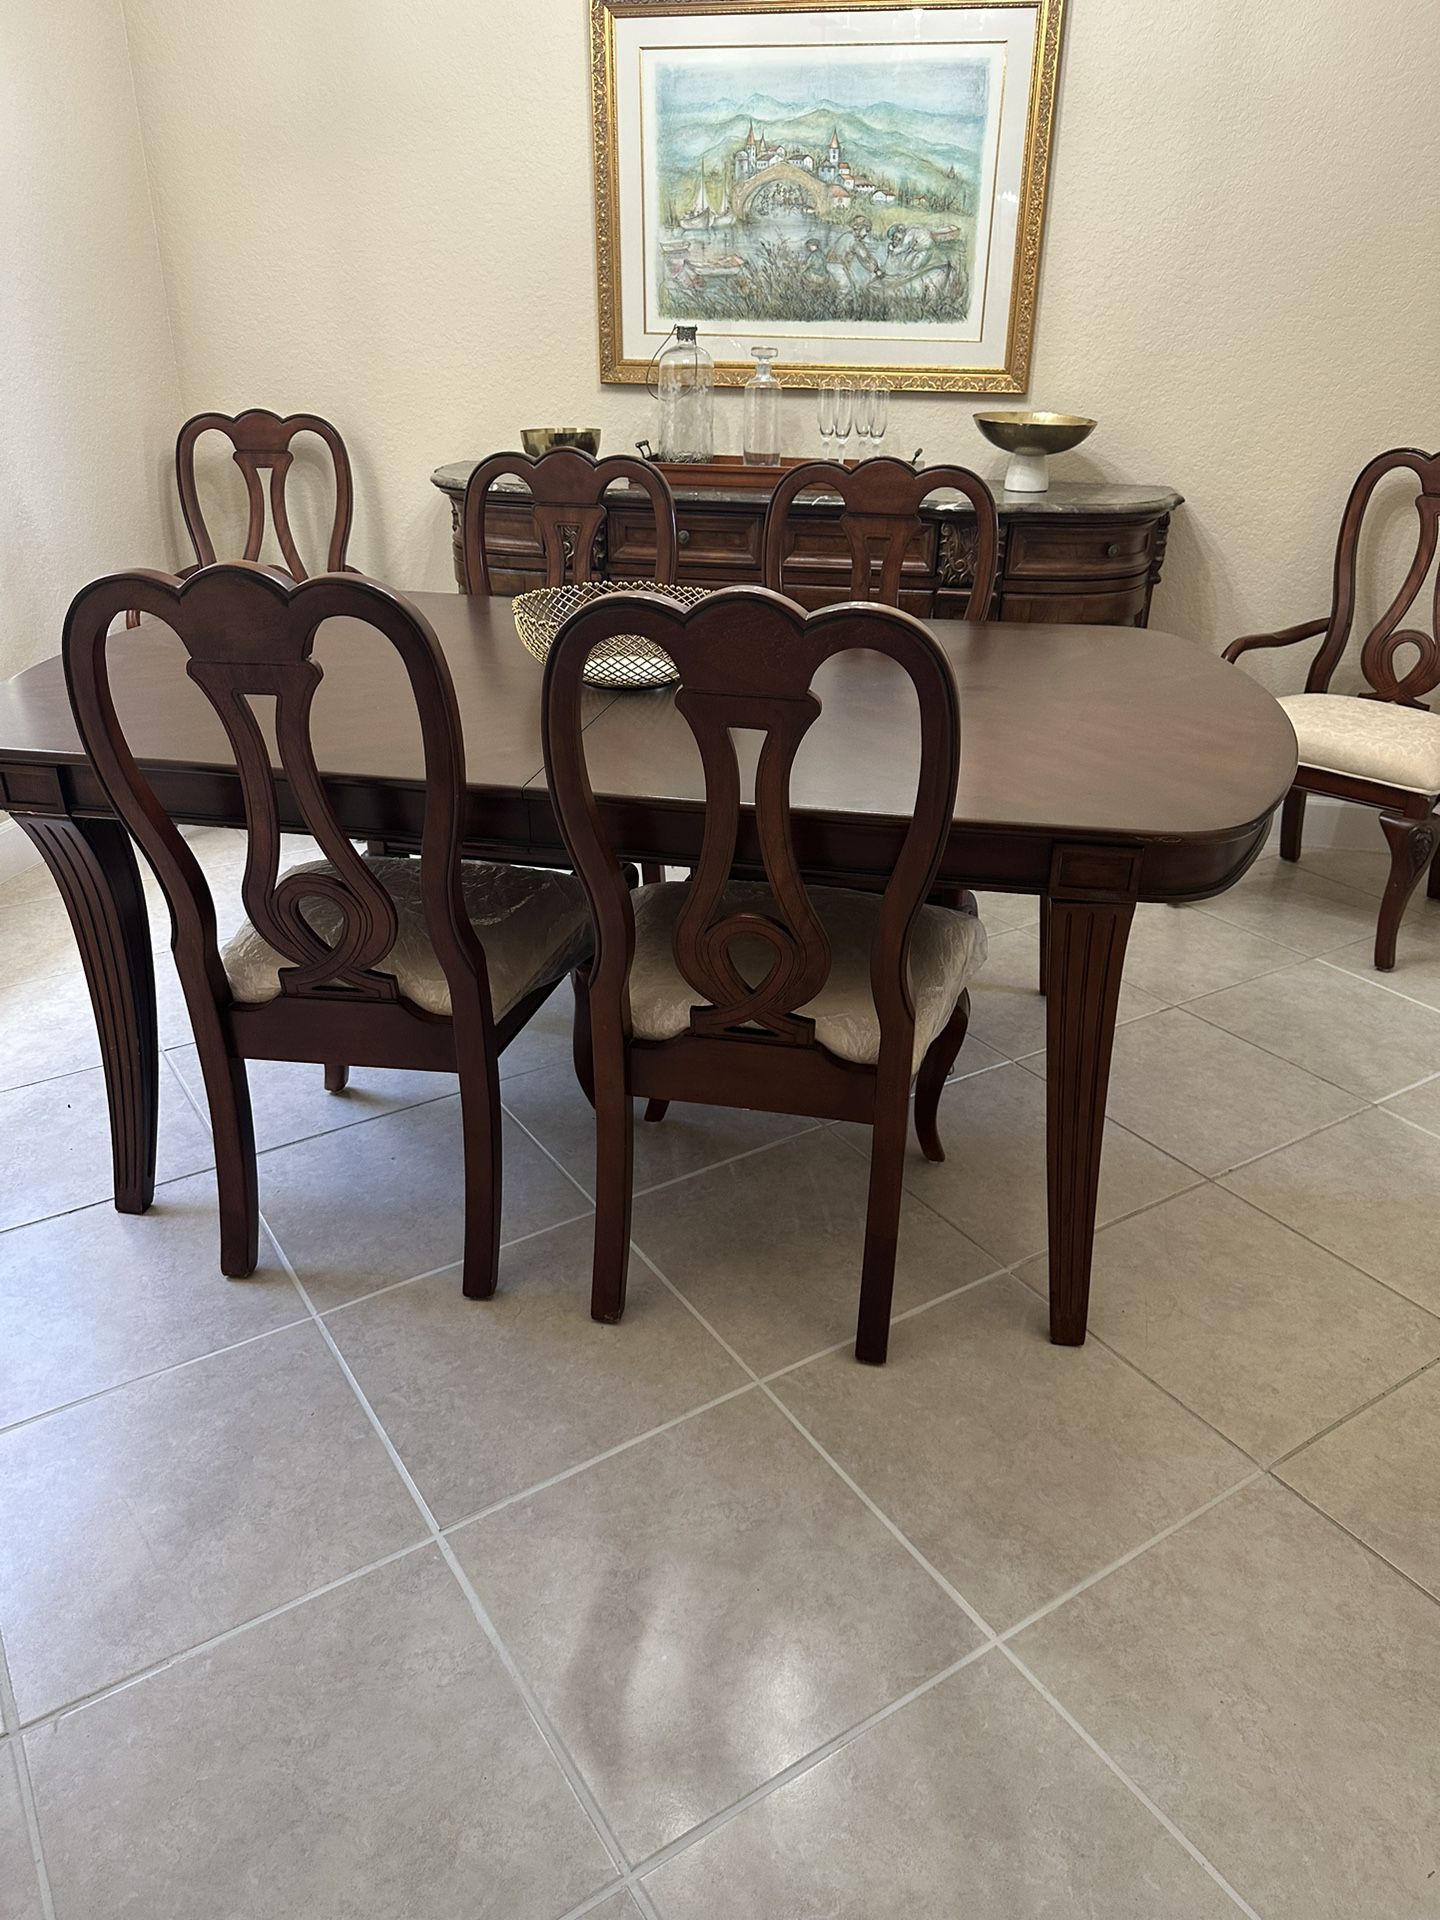 Gorgeous Dining Room 12 Chairs Table Buffet China